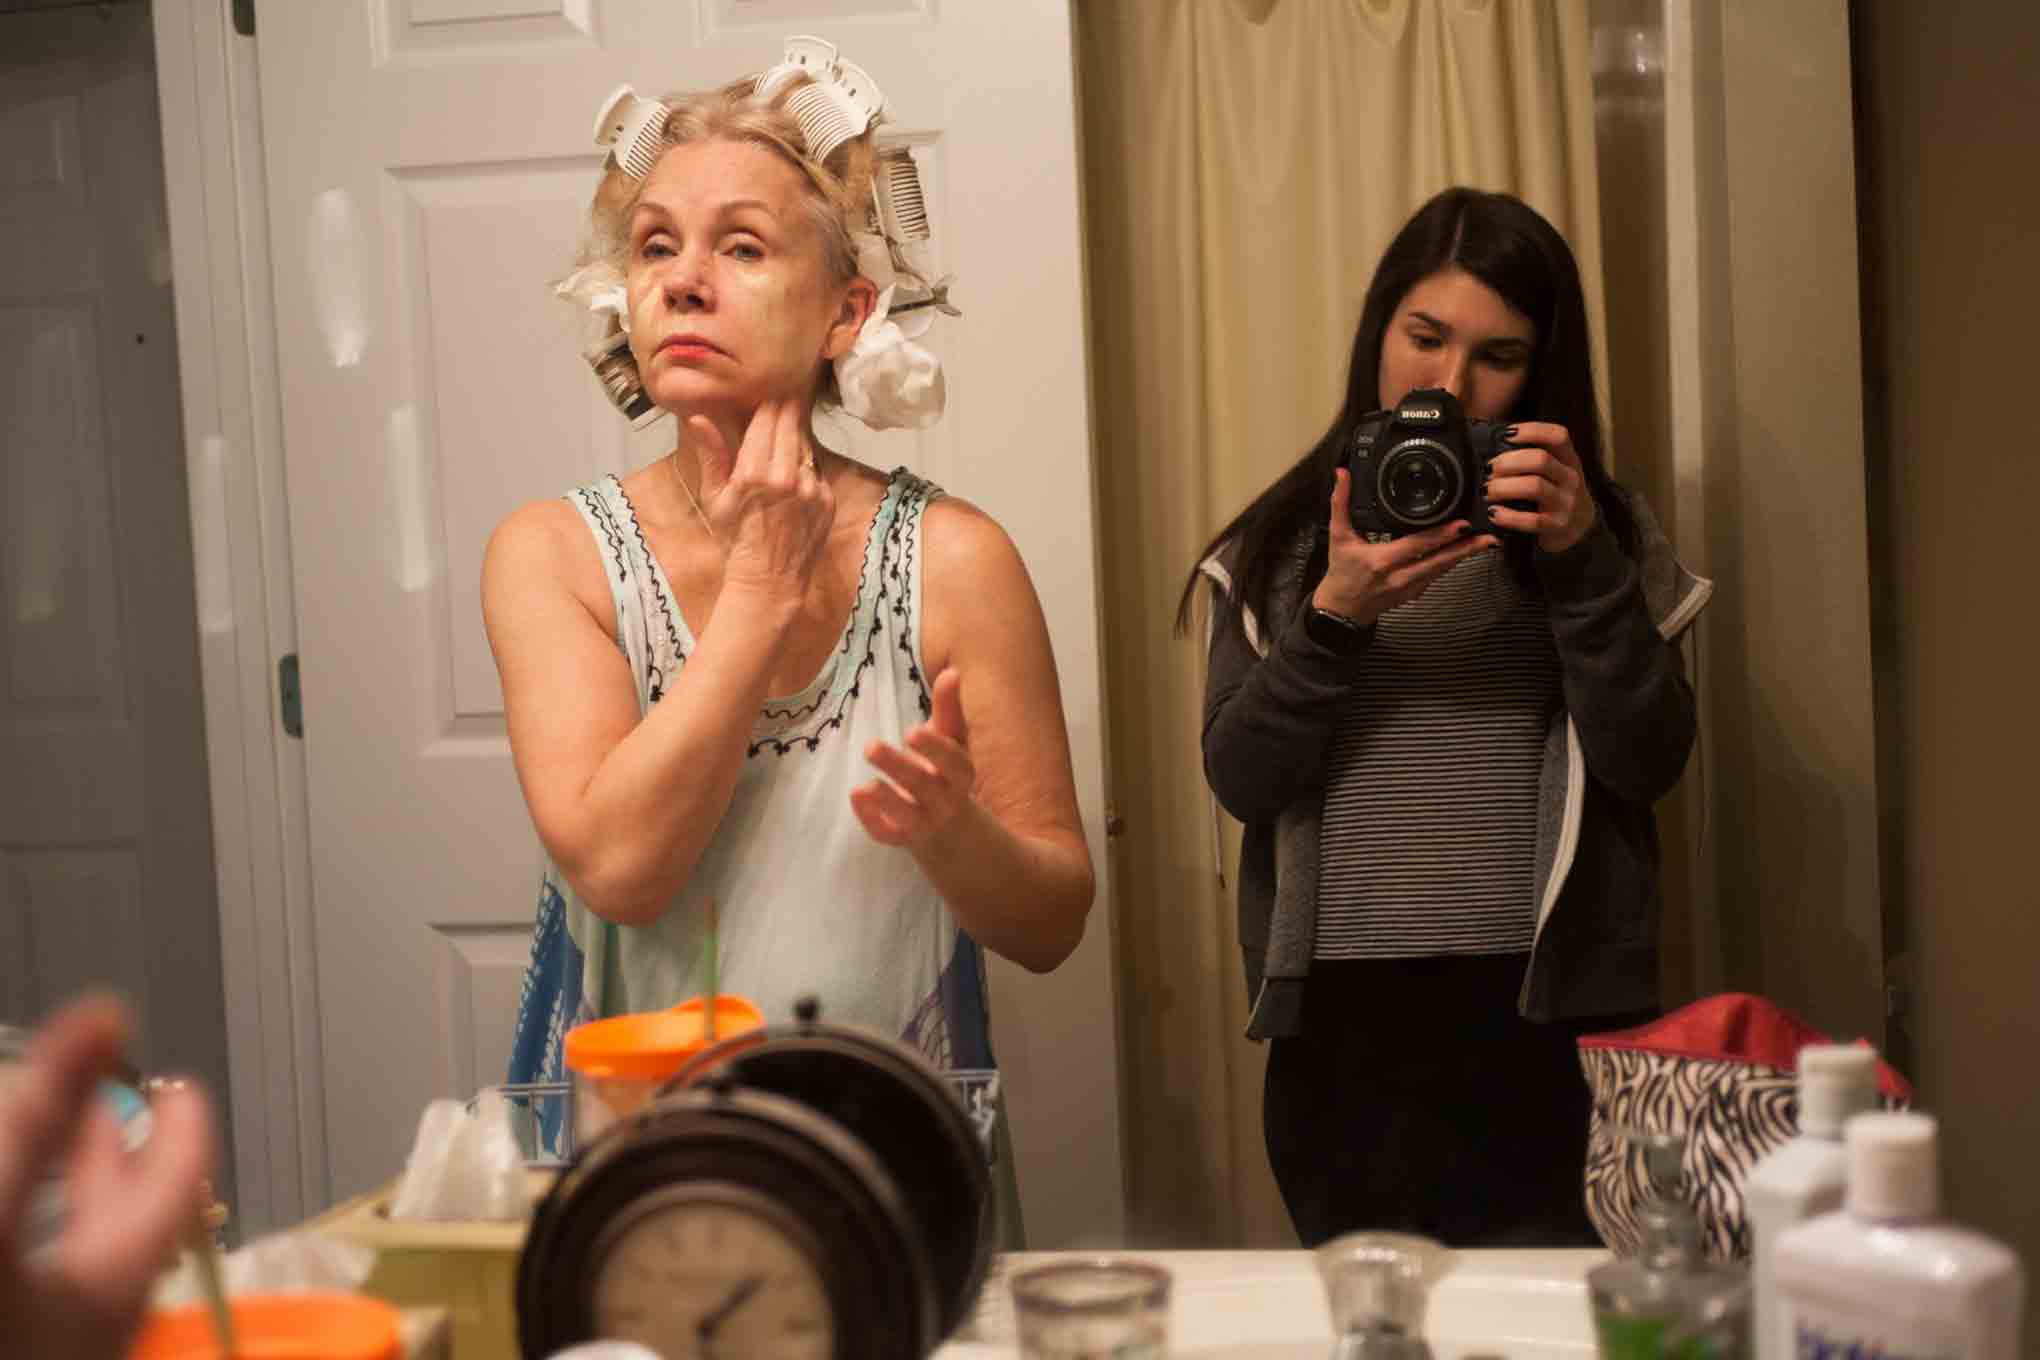 Spitz calls this photo of her mother applying makeup Mom’s Mask (Melissa Spitz)